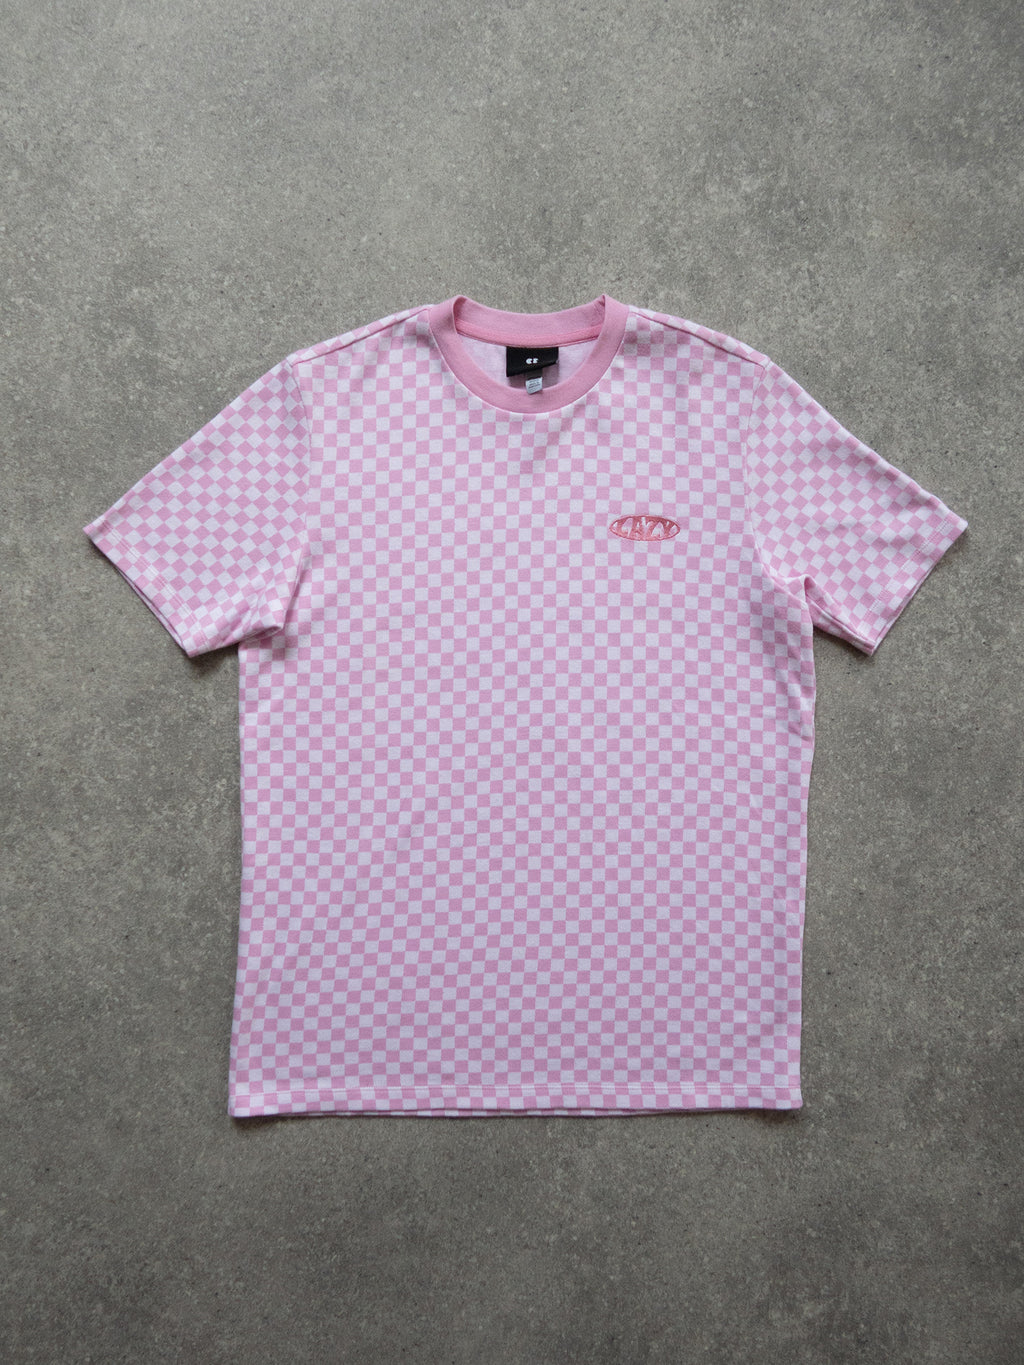 Lazy Oaf Checkers T-Shirt